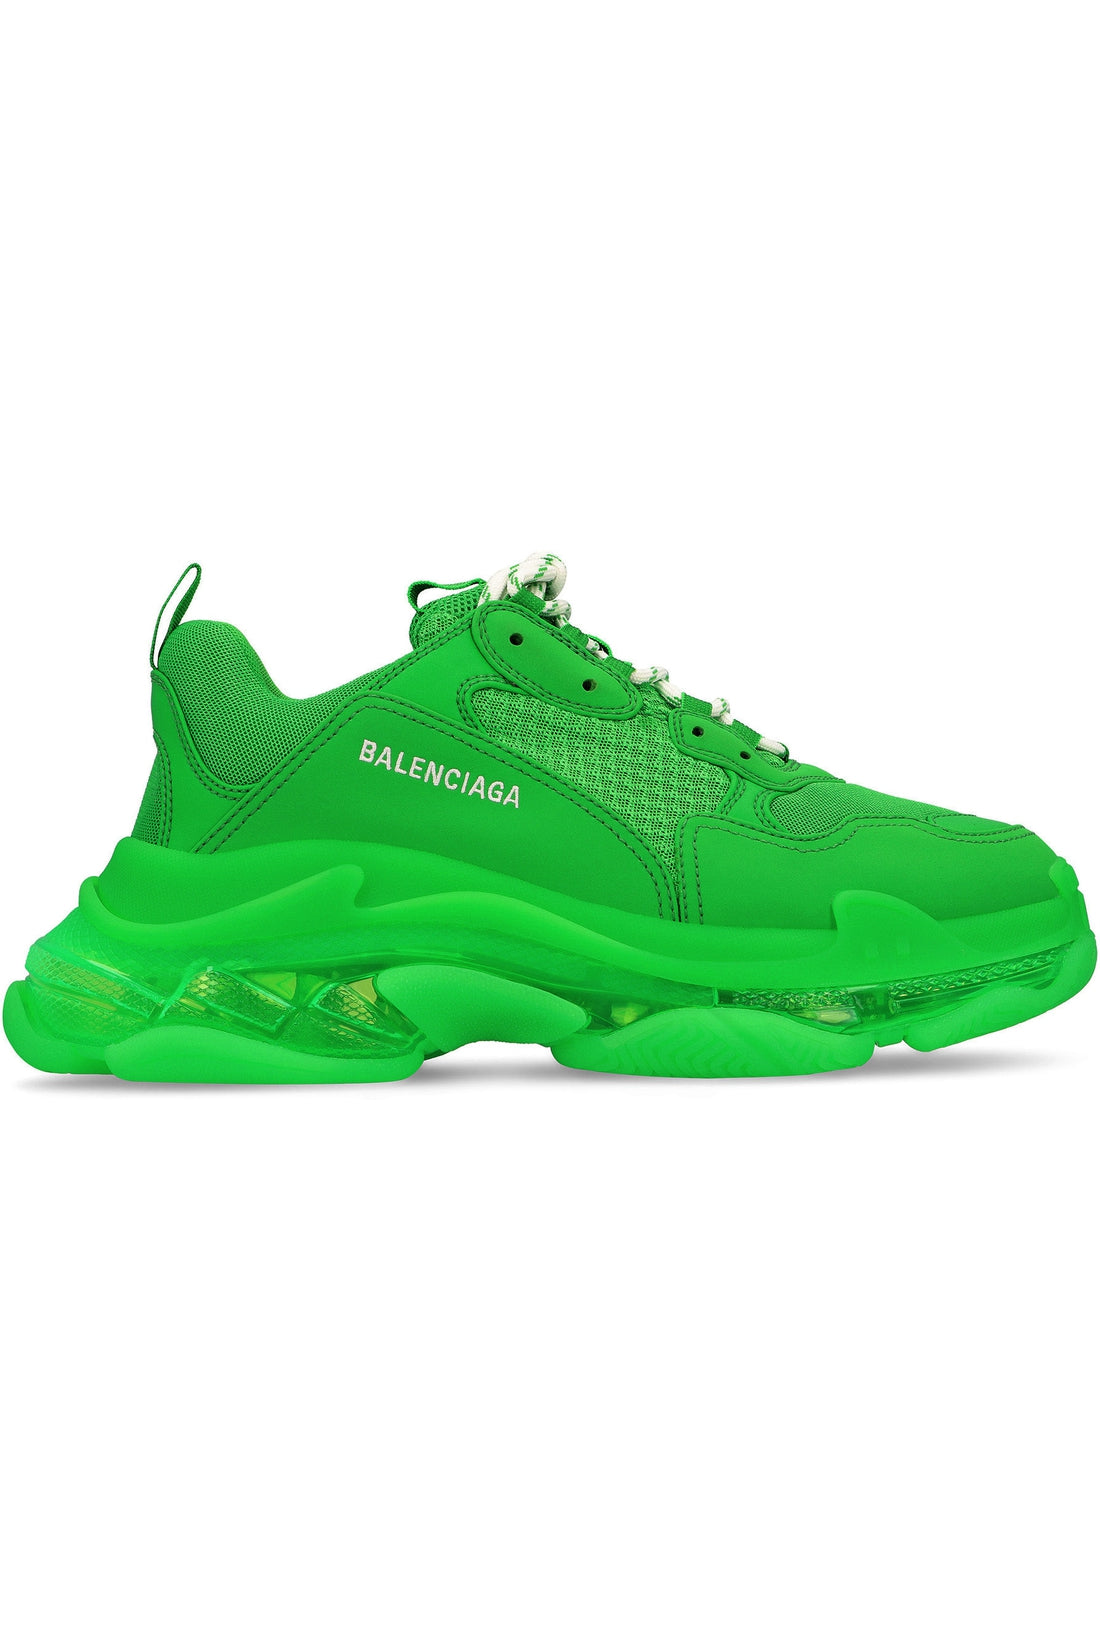 Balenciaga-OUTLET-SALE-Triple S Clear Sole chunky sneakers-ARCHIVIST